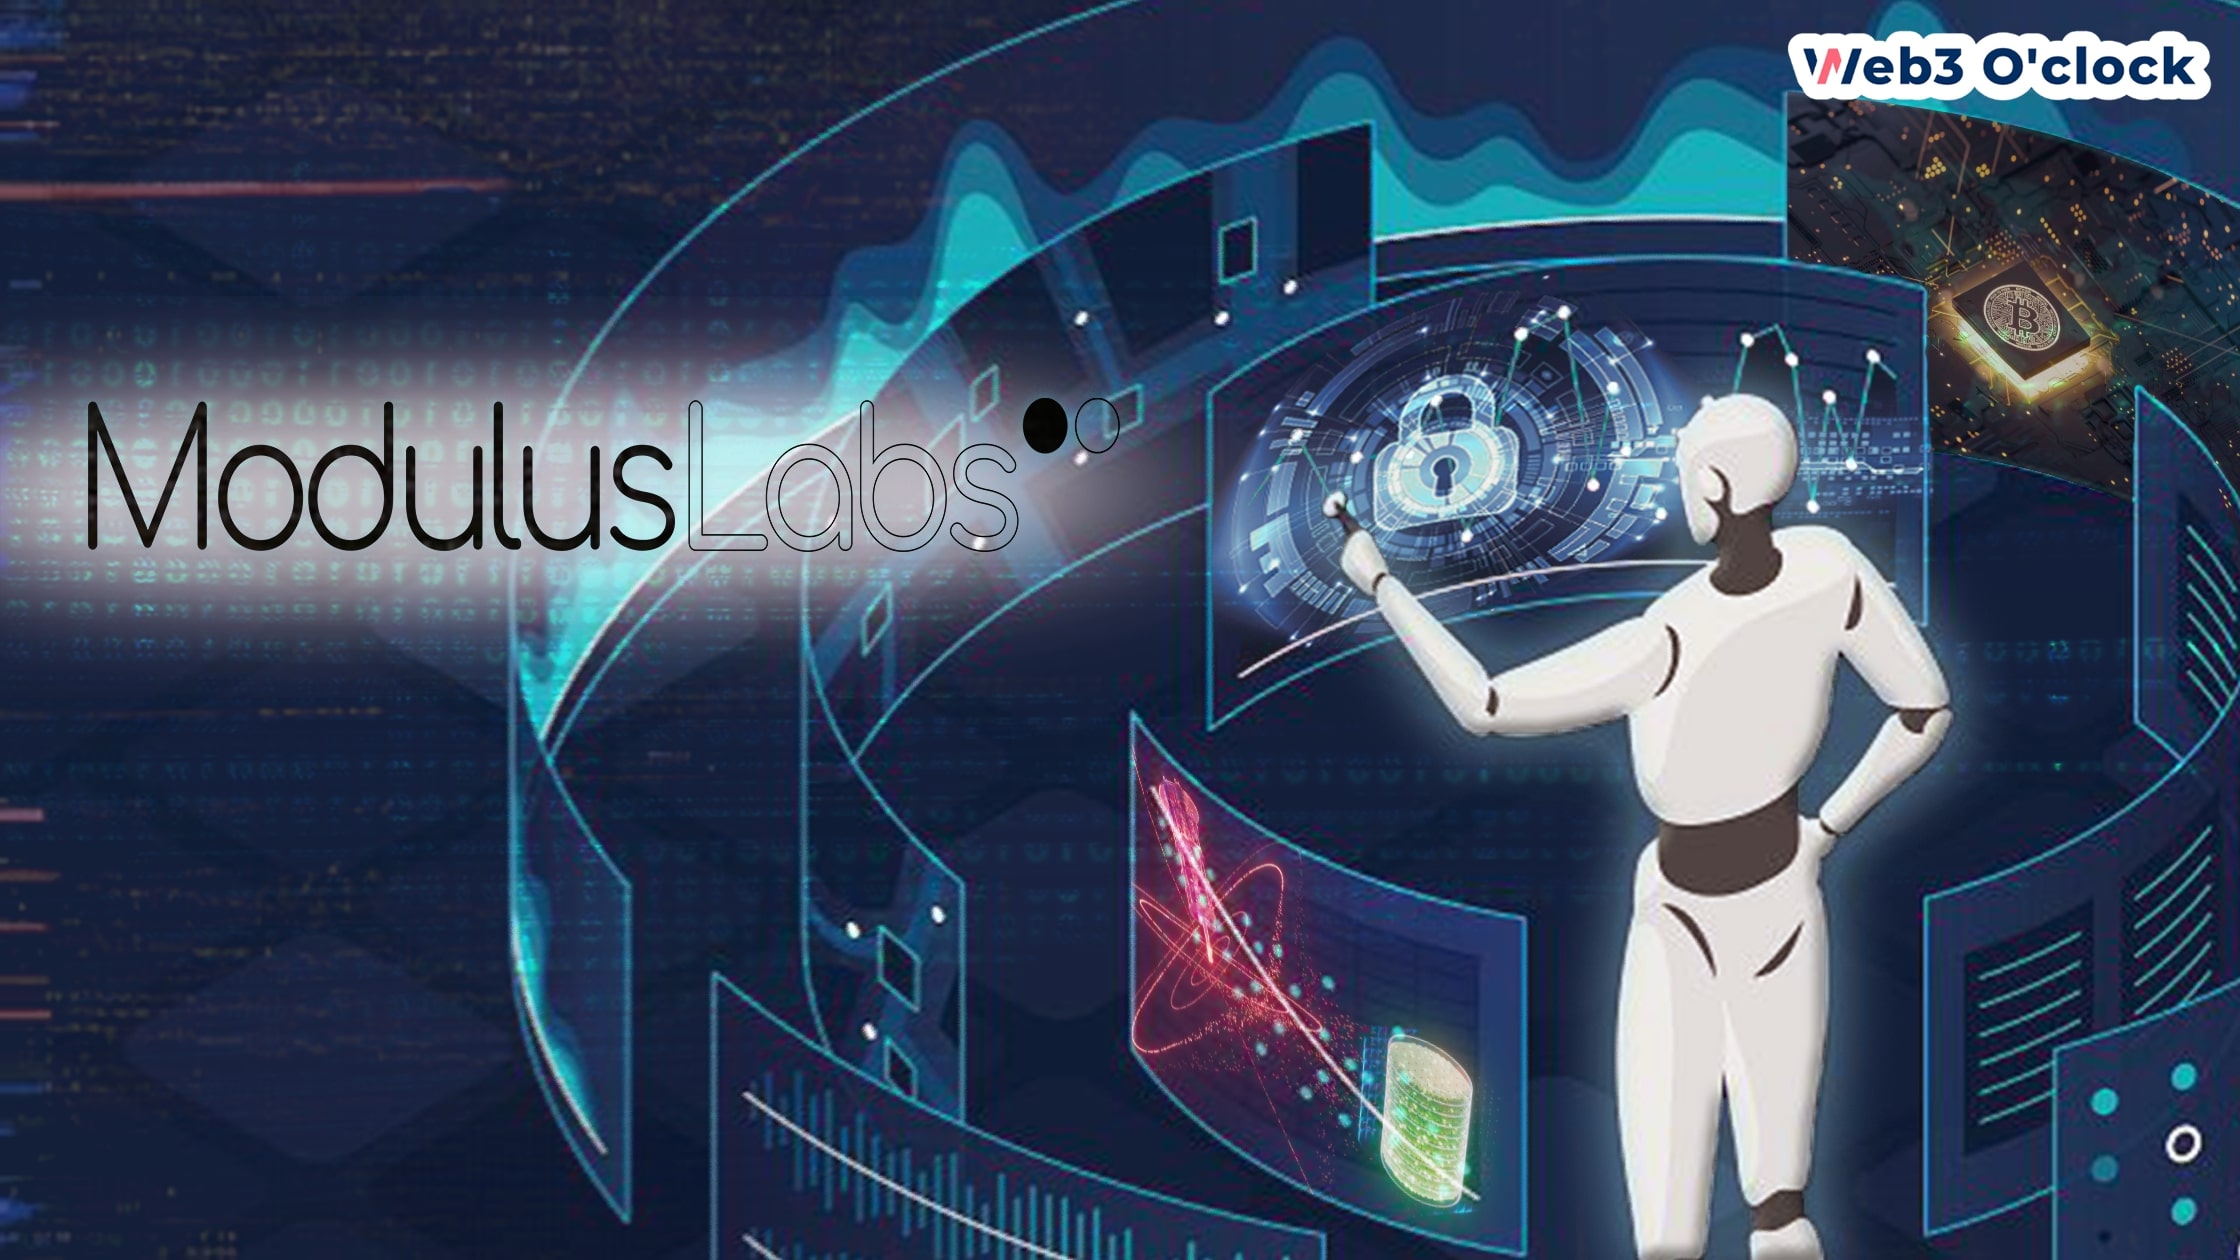 Modulus Labs Secures $6.3 Million Funding by Web3O'clock